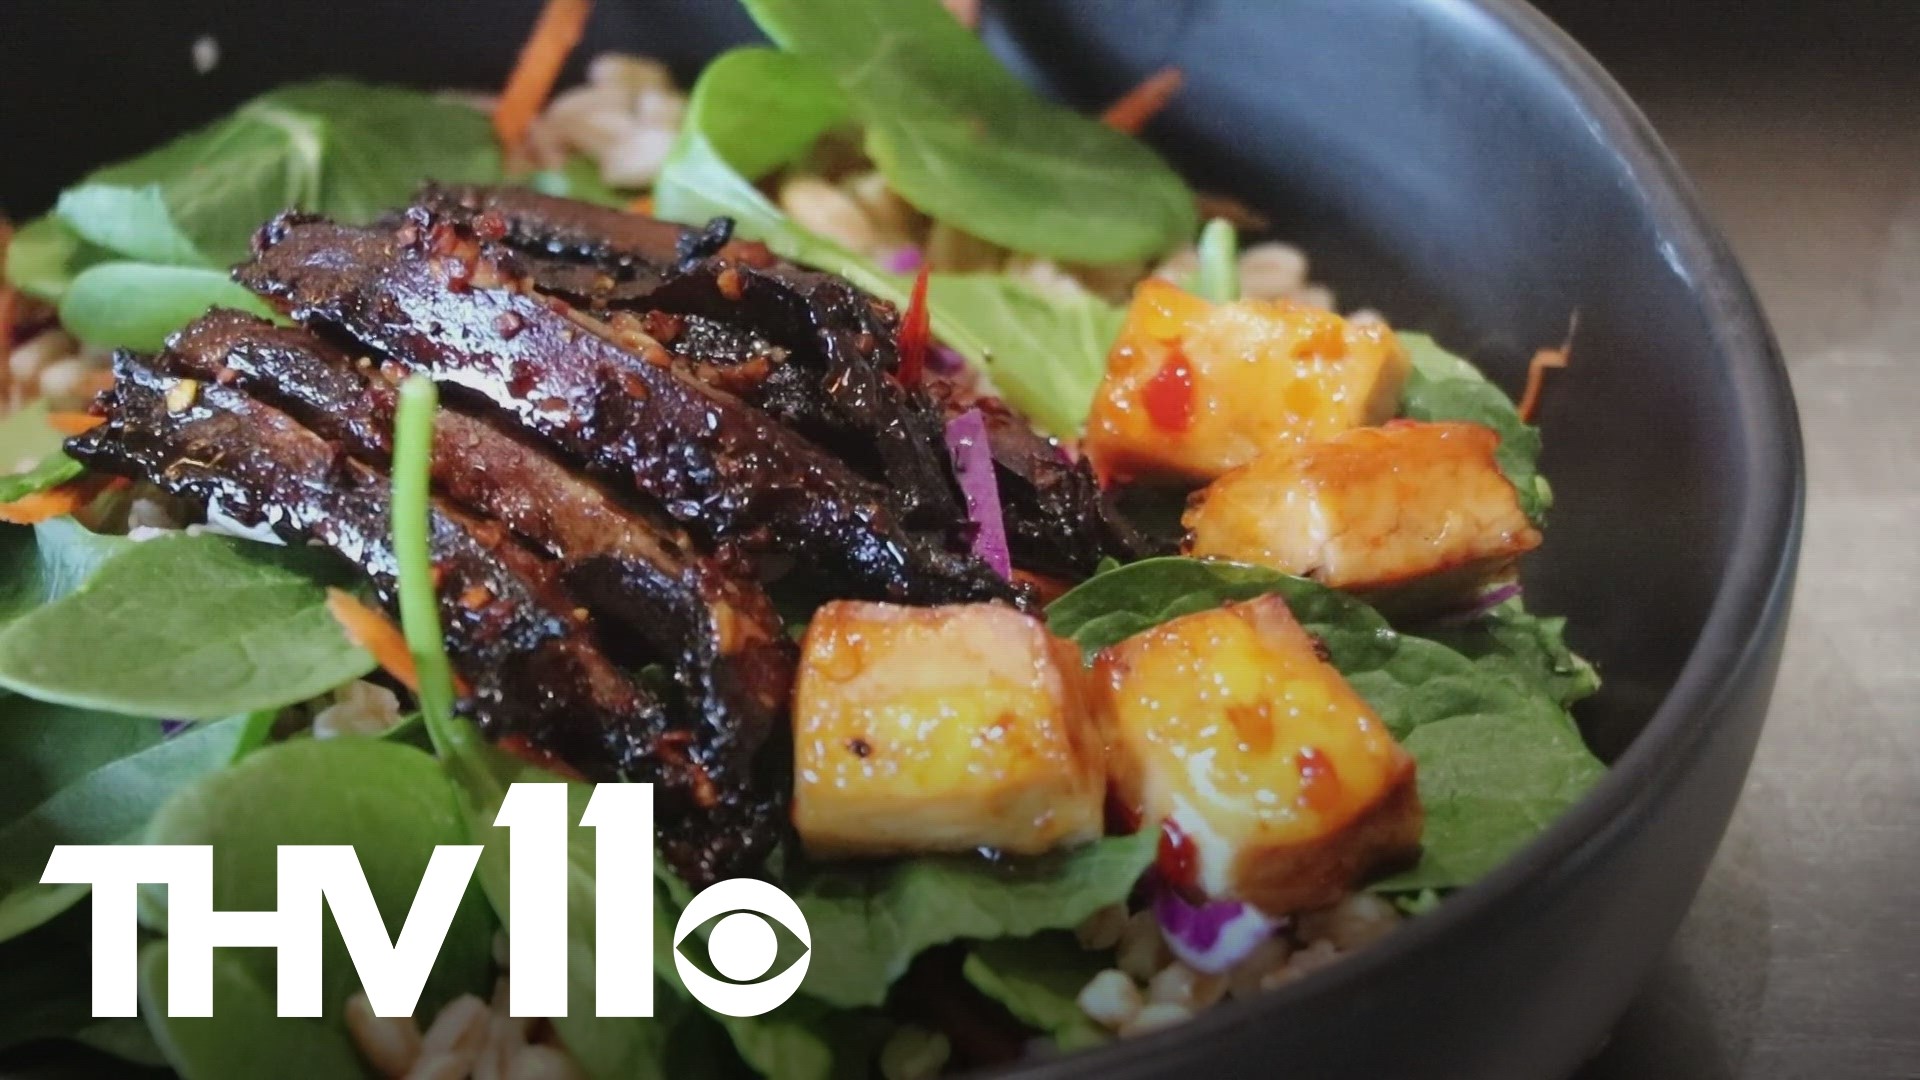 One local chef is working to honor plants and their benefits by introducing Arkansans to simple ways they can incorporate vegan eating habits into their lives.